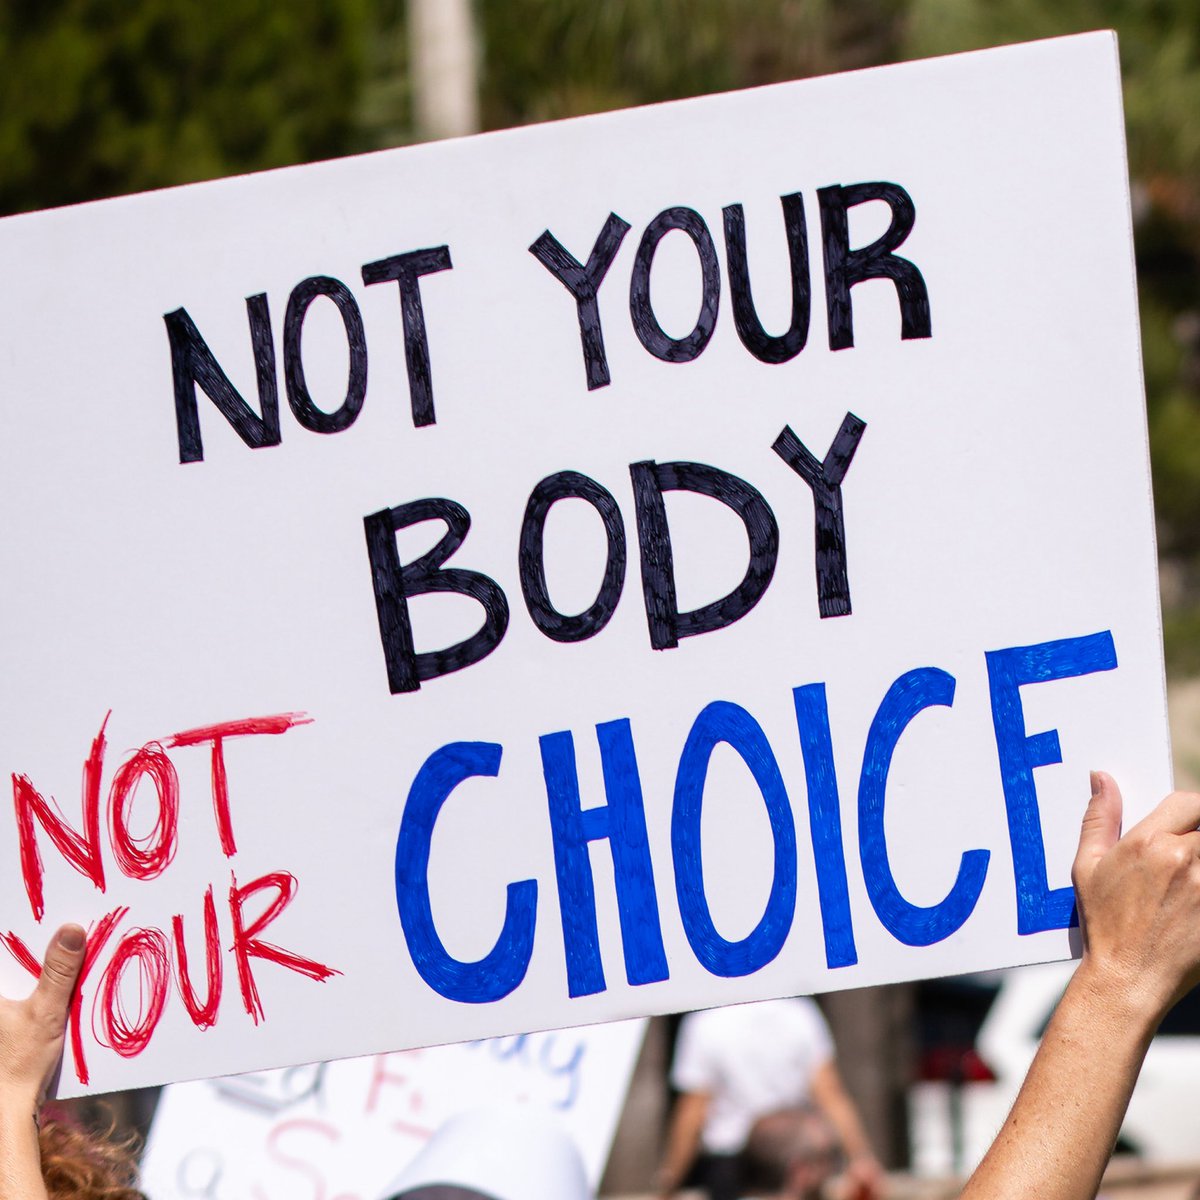 On Tuesday the Arizona Supreme Court ruled to uphold an obscure 160-year-old law that bans abortions and punishes doctors who provide them. Democratic Governors can’t get things done without having a democratic majority. Democrats need to win on every level. We all need to vote…